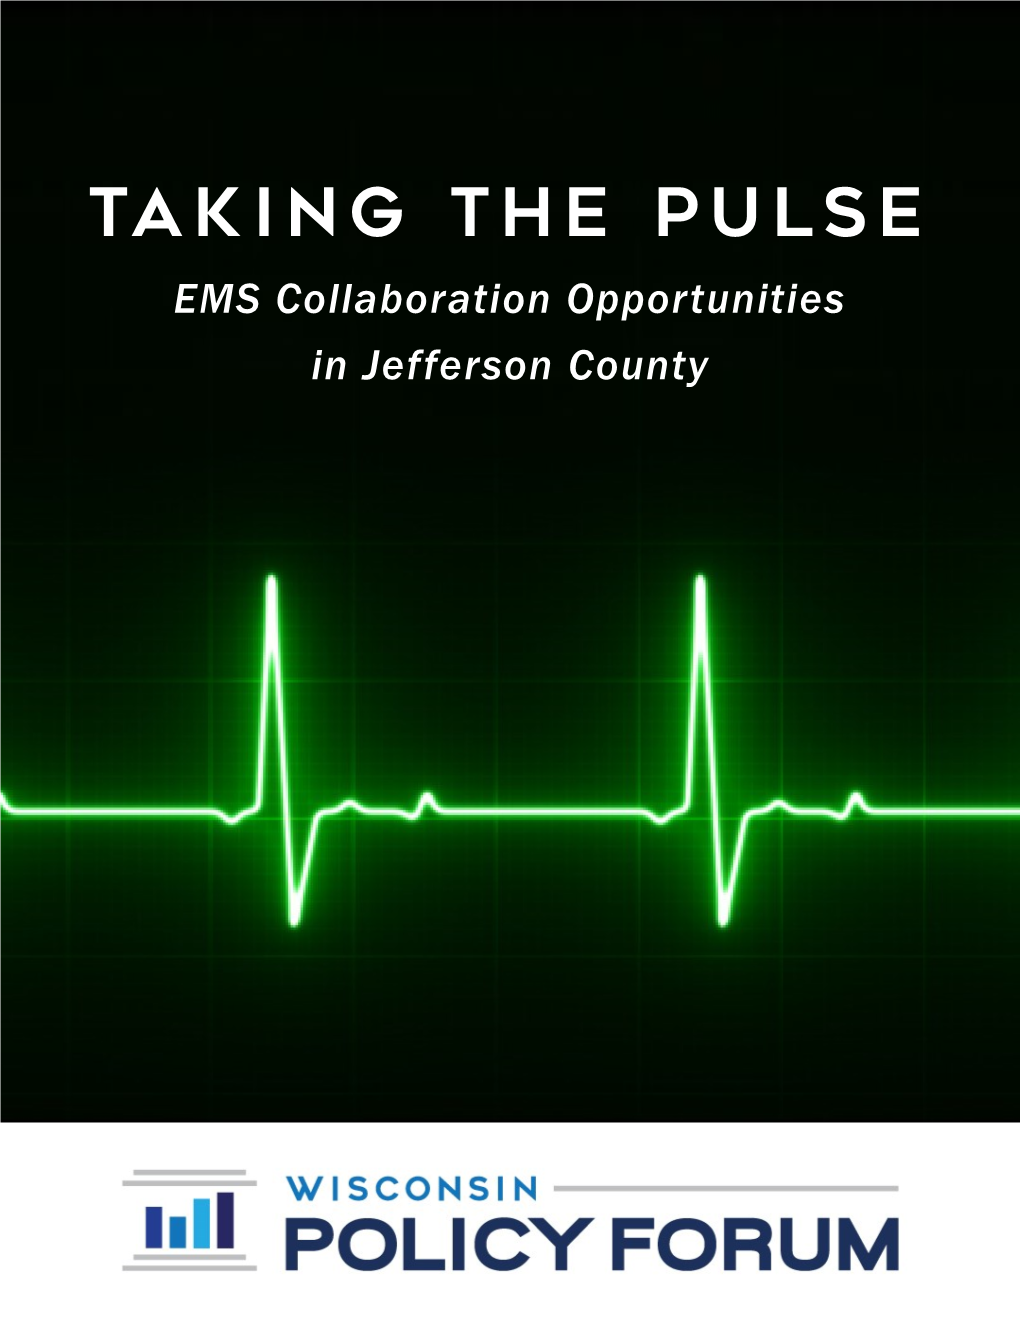 EMS Collaboration Opportunities in Jefferson County About the Wisconsin Policy Forum